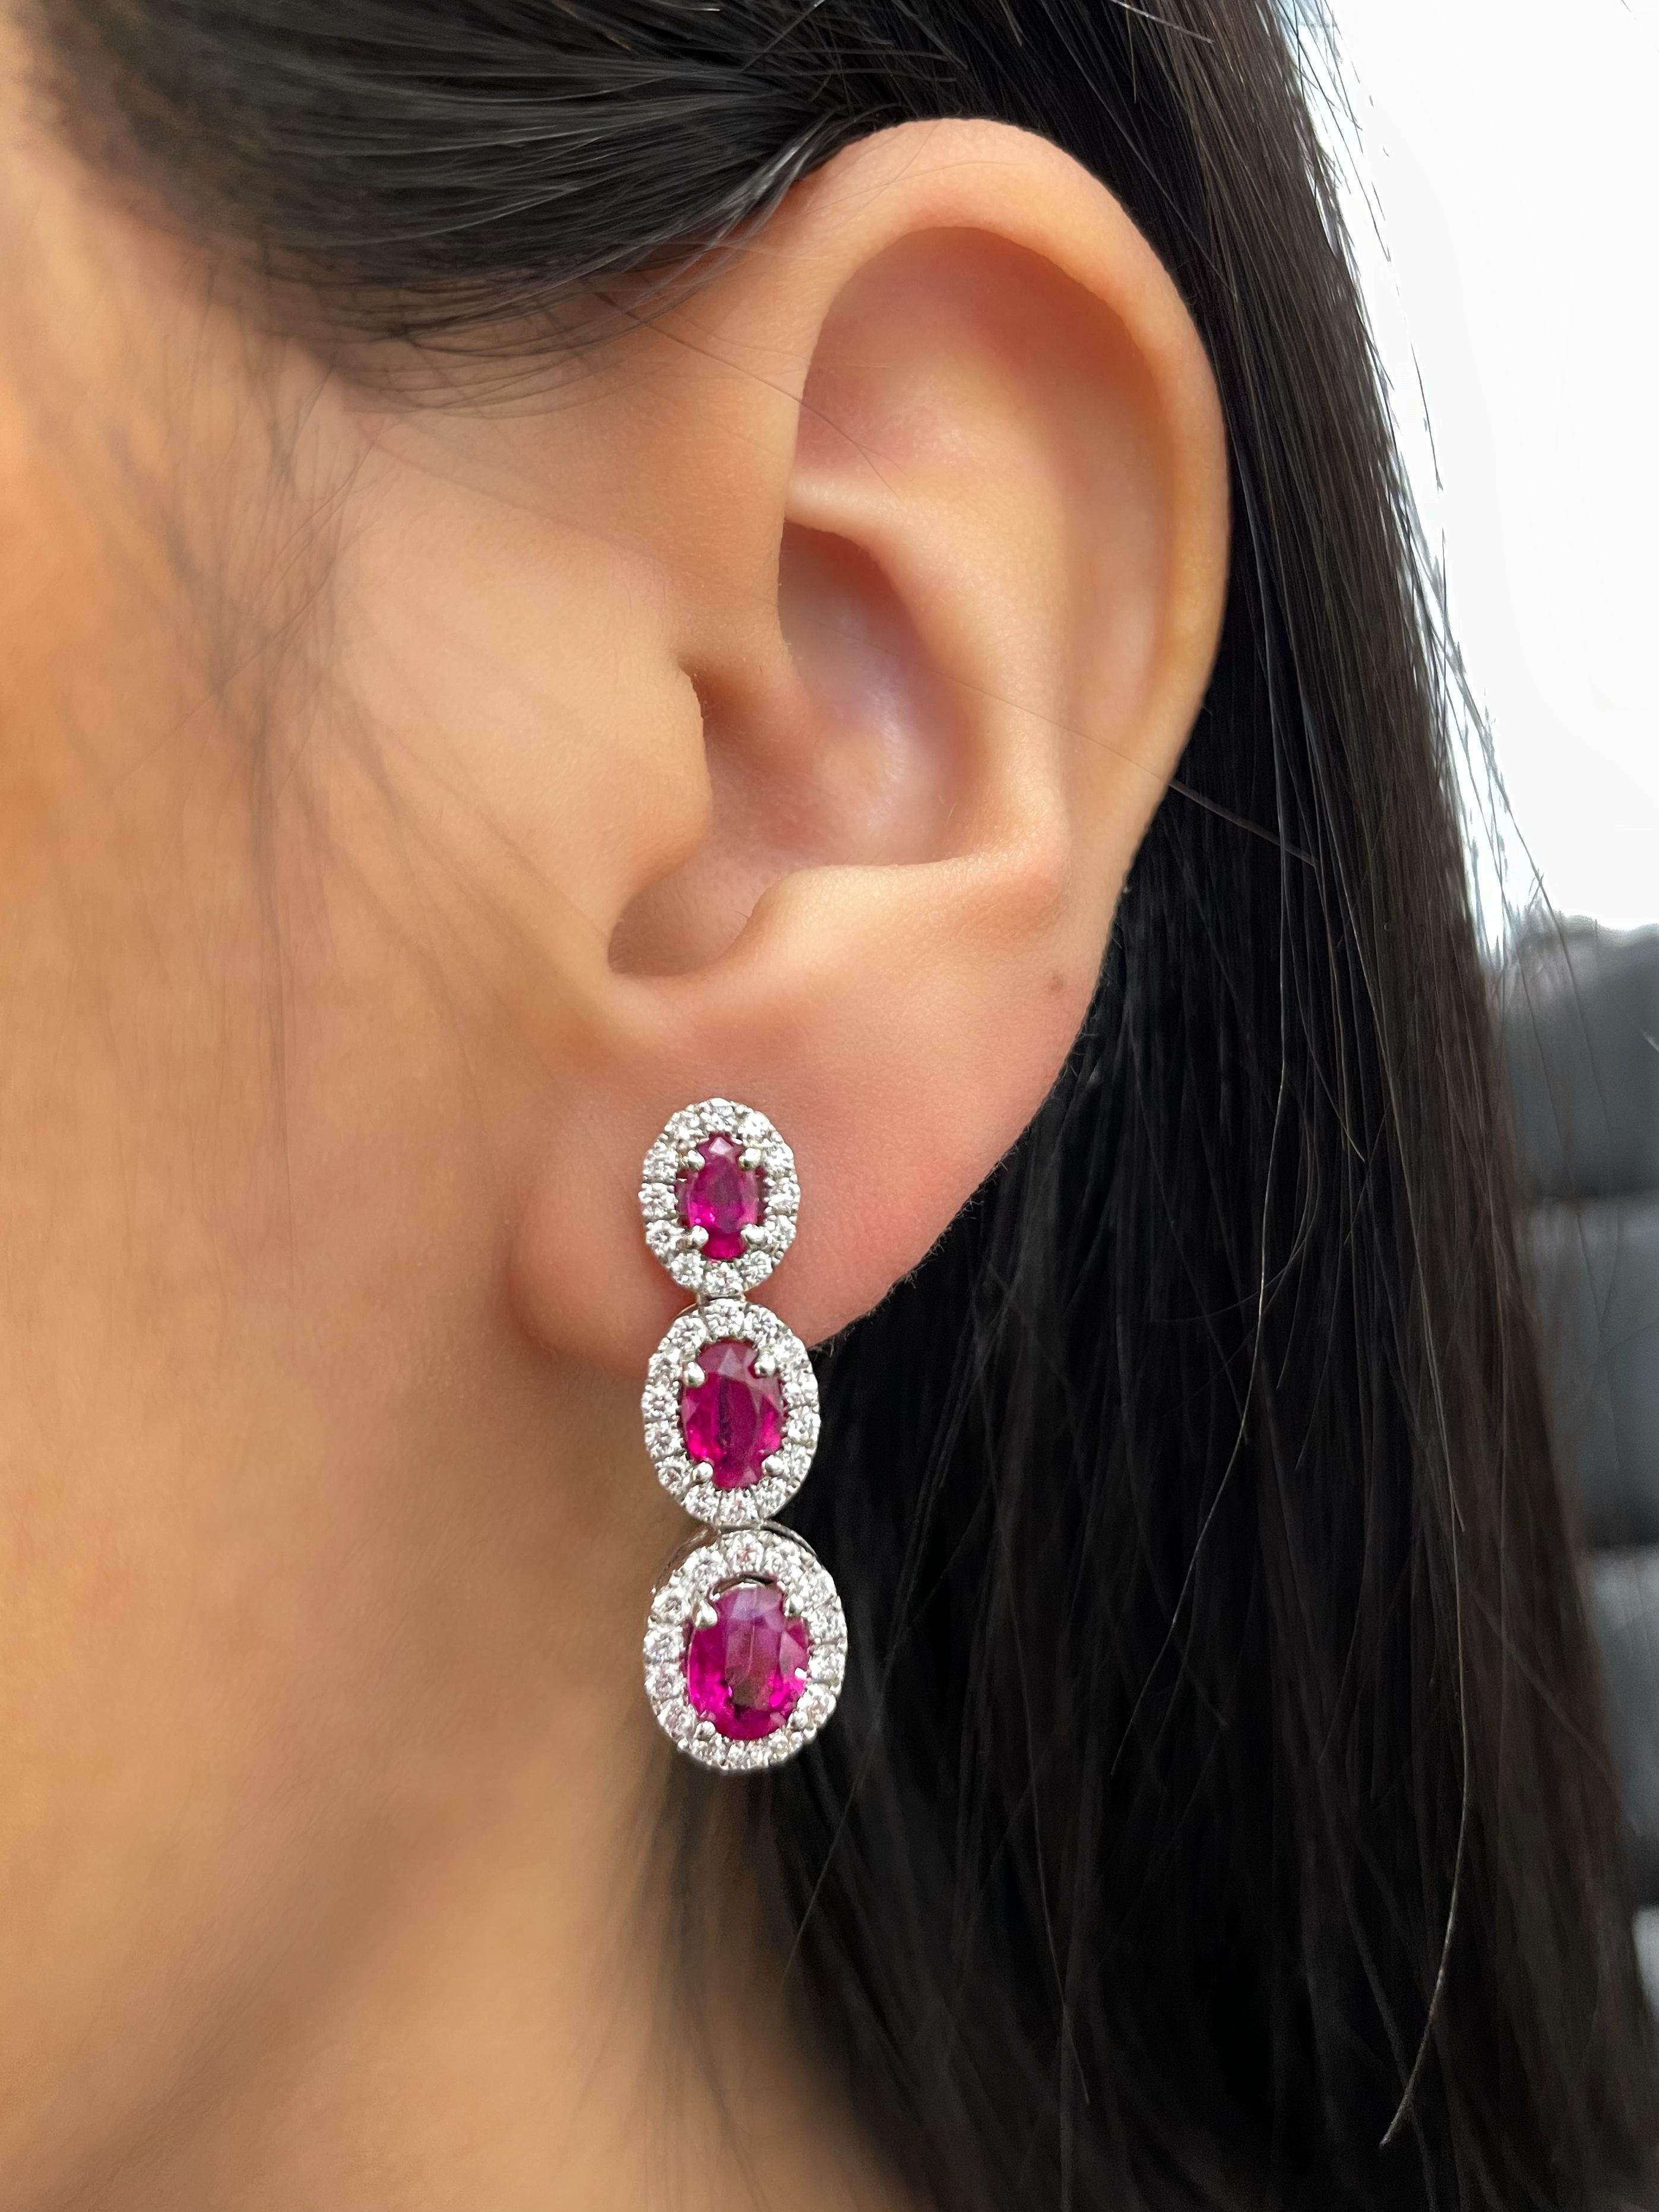 These stunning 3.31 ct Natural Ruby & Diamond earrings are sure to turn heads. The deep red hue of the rubies is perfectly complemented by the sparkling diamonds, creating a dazzling contrast that will make any outfit pop. Crafted with care and